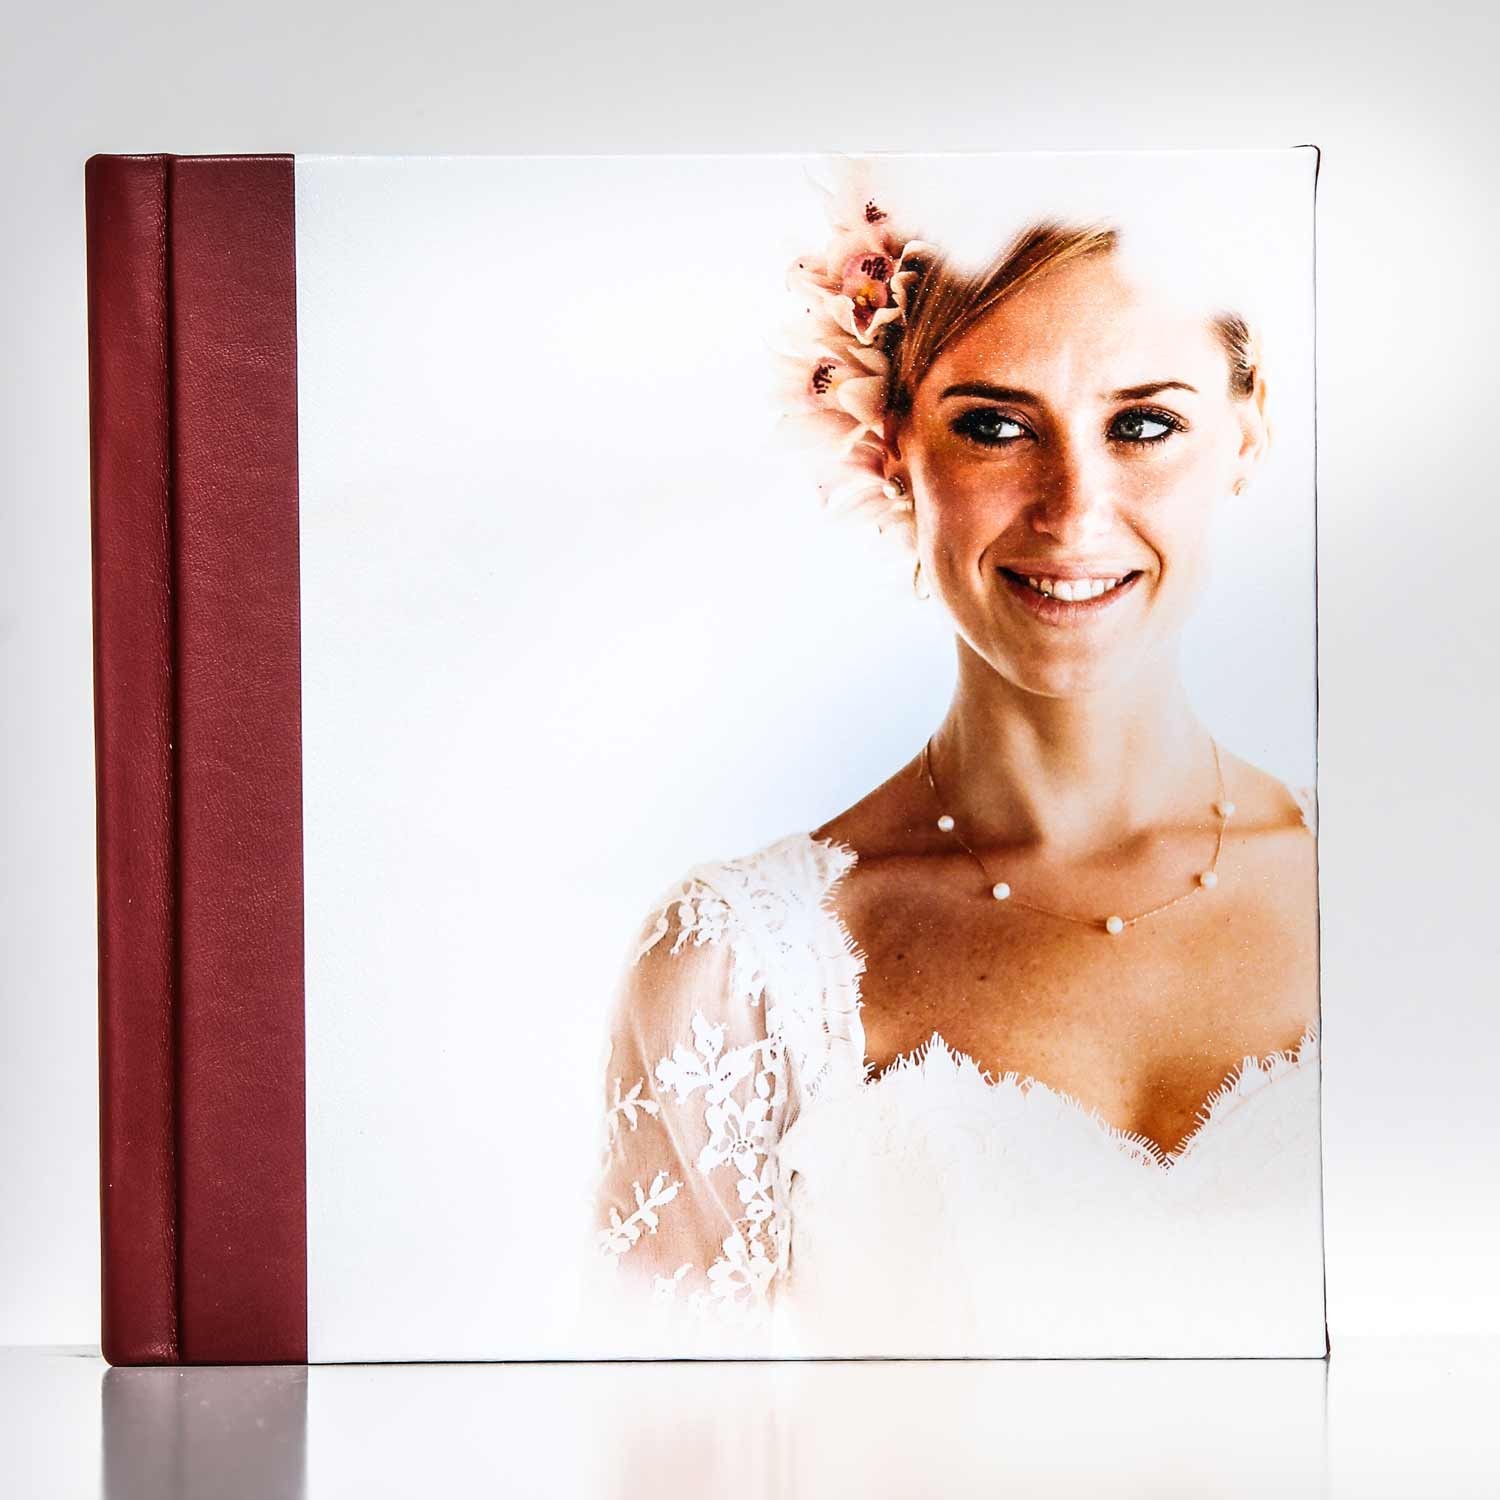 Silverbook 20x20cm with Leather-look